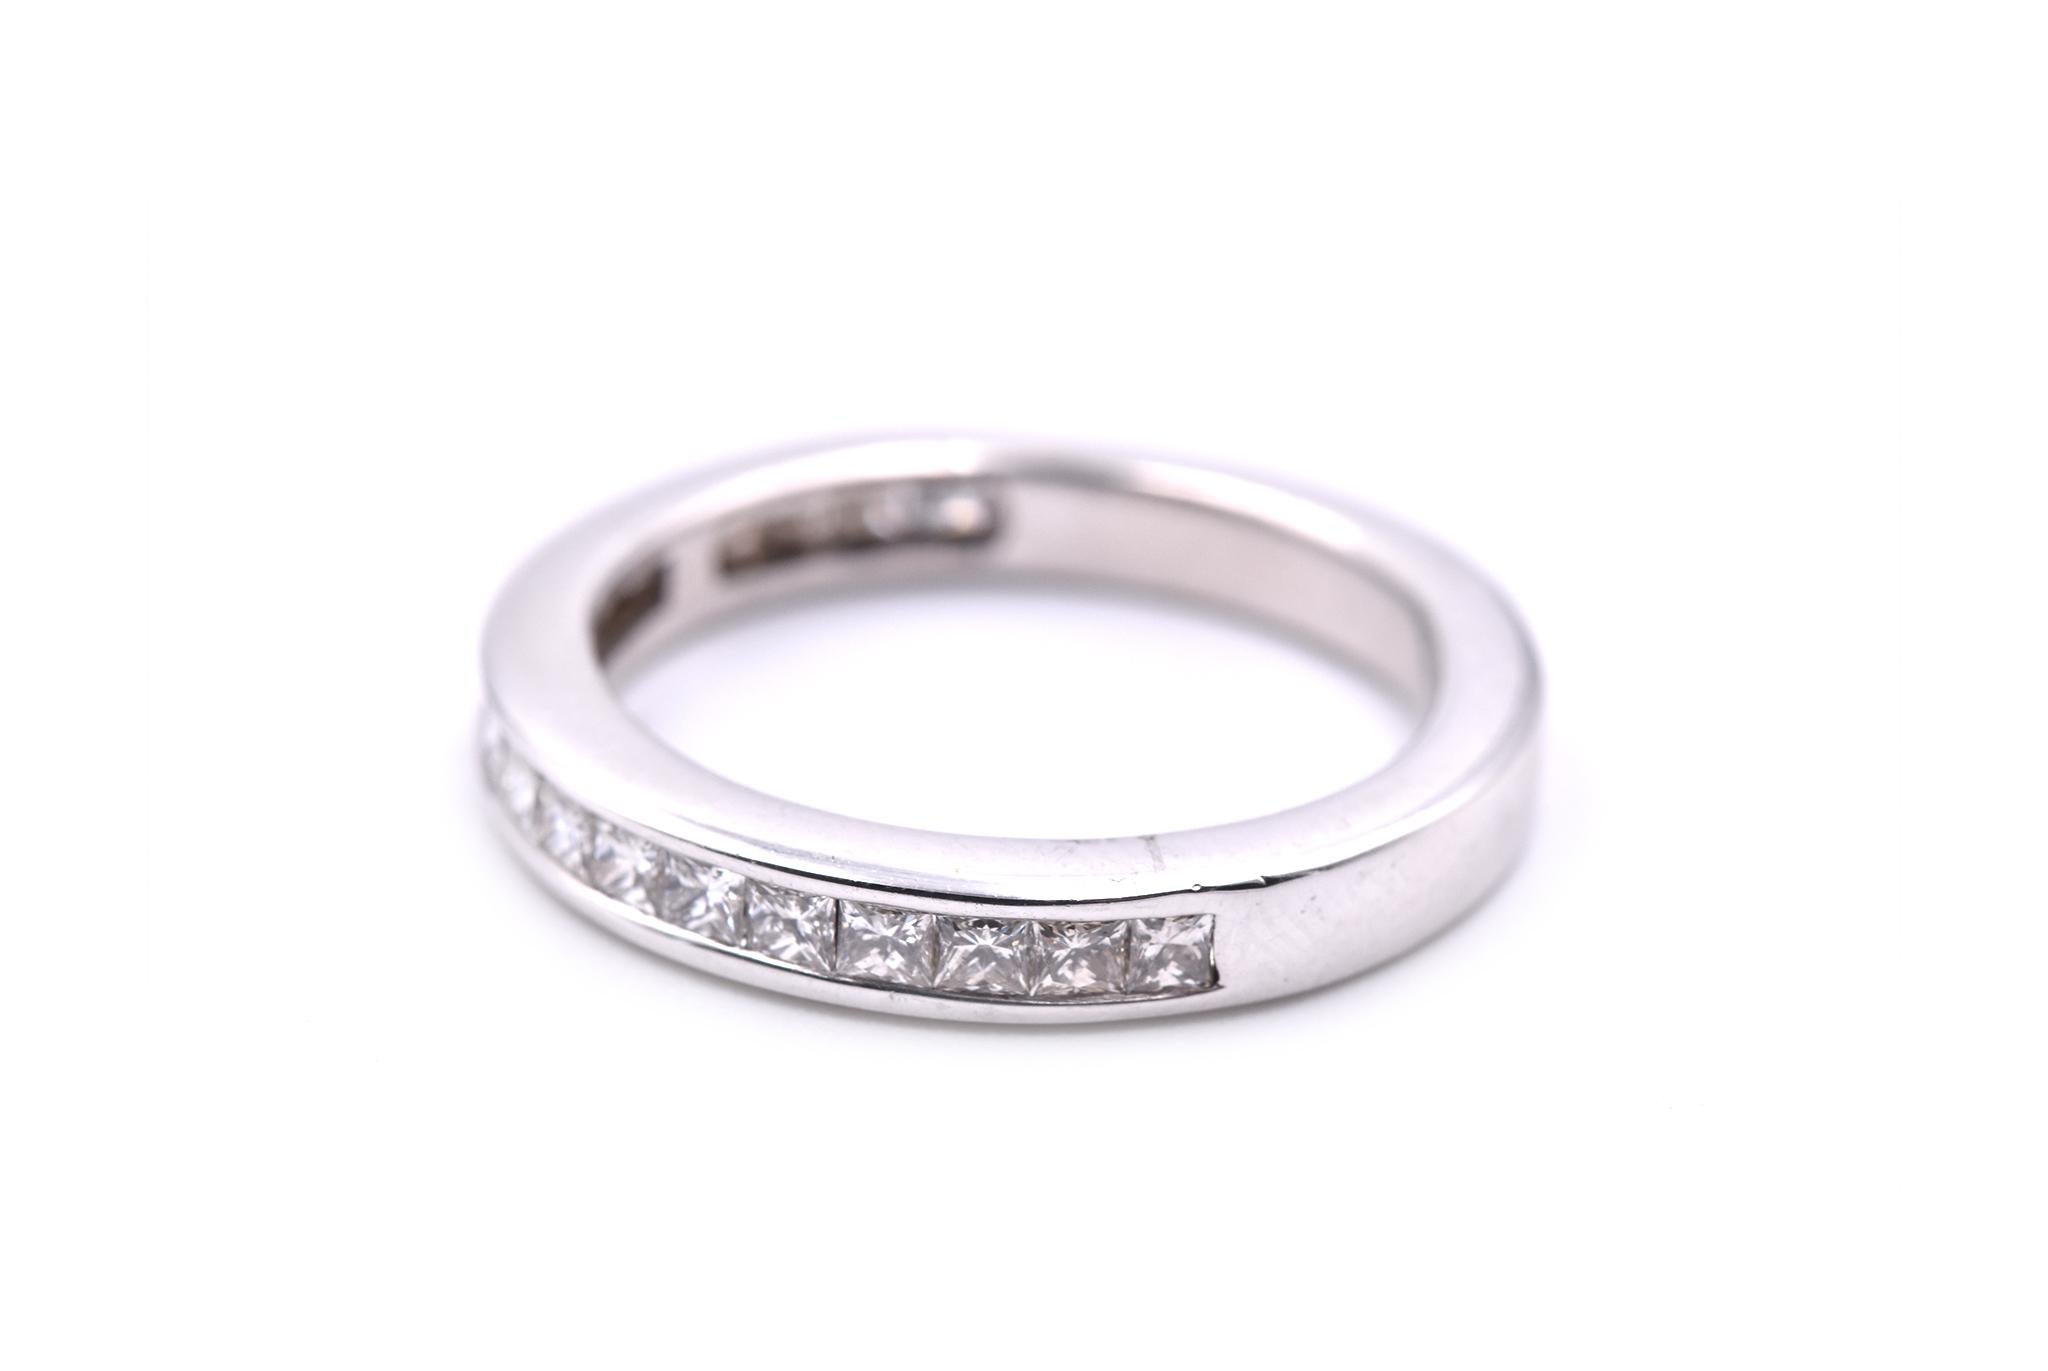 Designer: custom 
Material: 14K White Gold
Diamonds: 20 Princess cut = 1.20cttw
Color: I
Clarity: SI1
Size: 7.5
Dimensions: Ring is 2.04mm wide
Weight: 3.74 Grams
